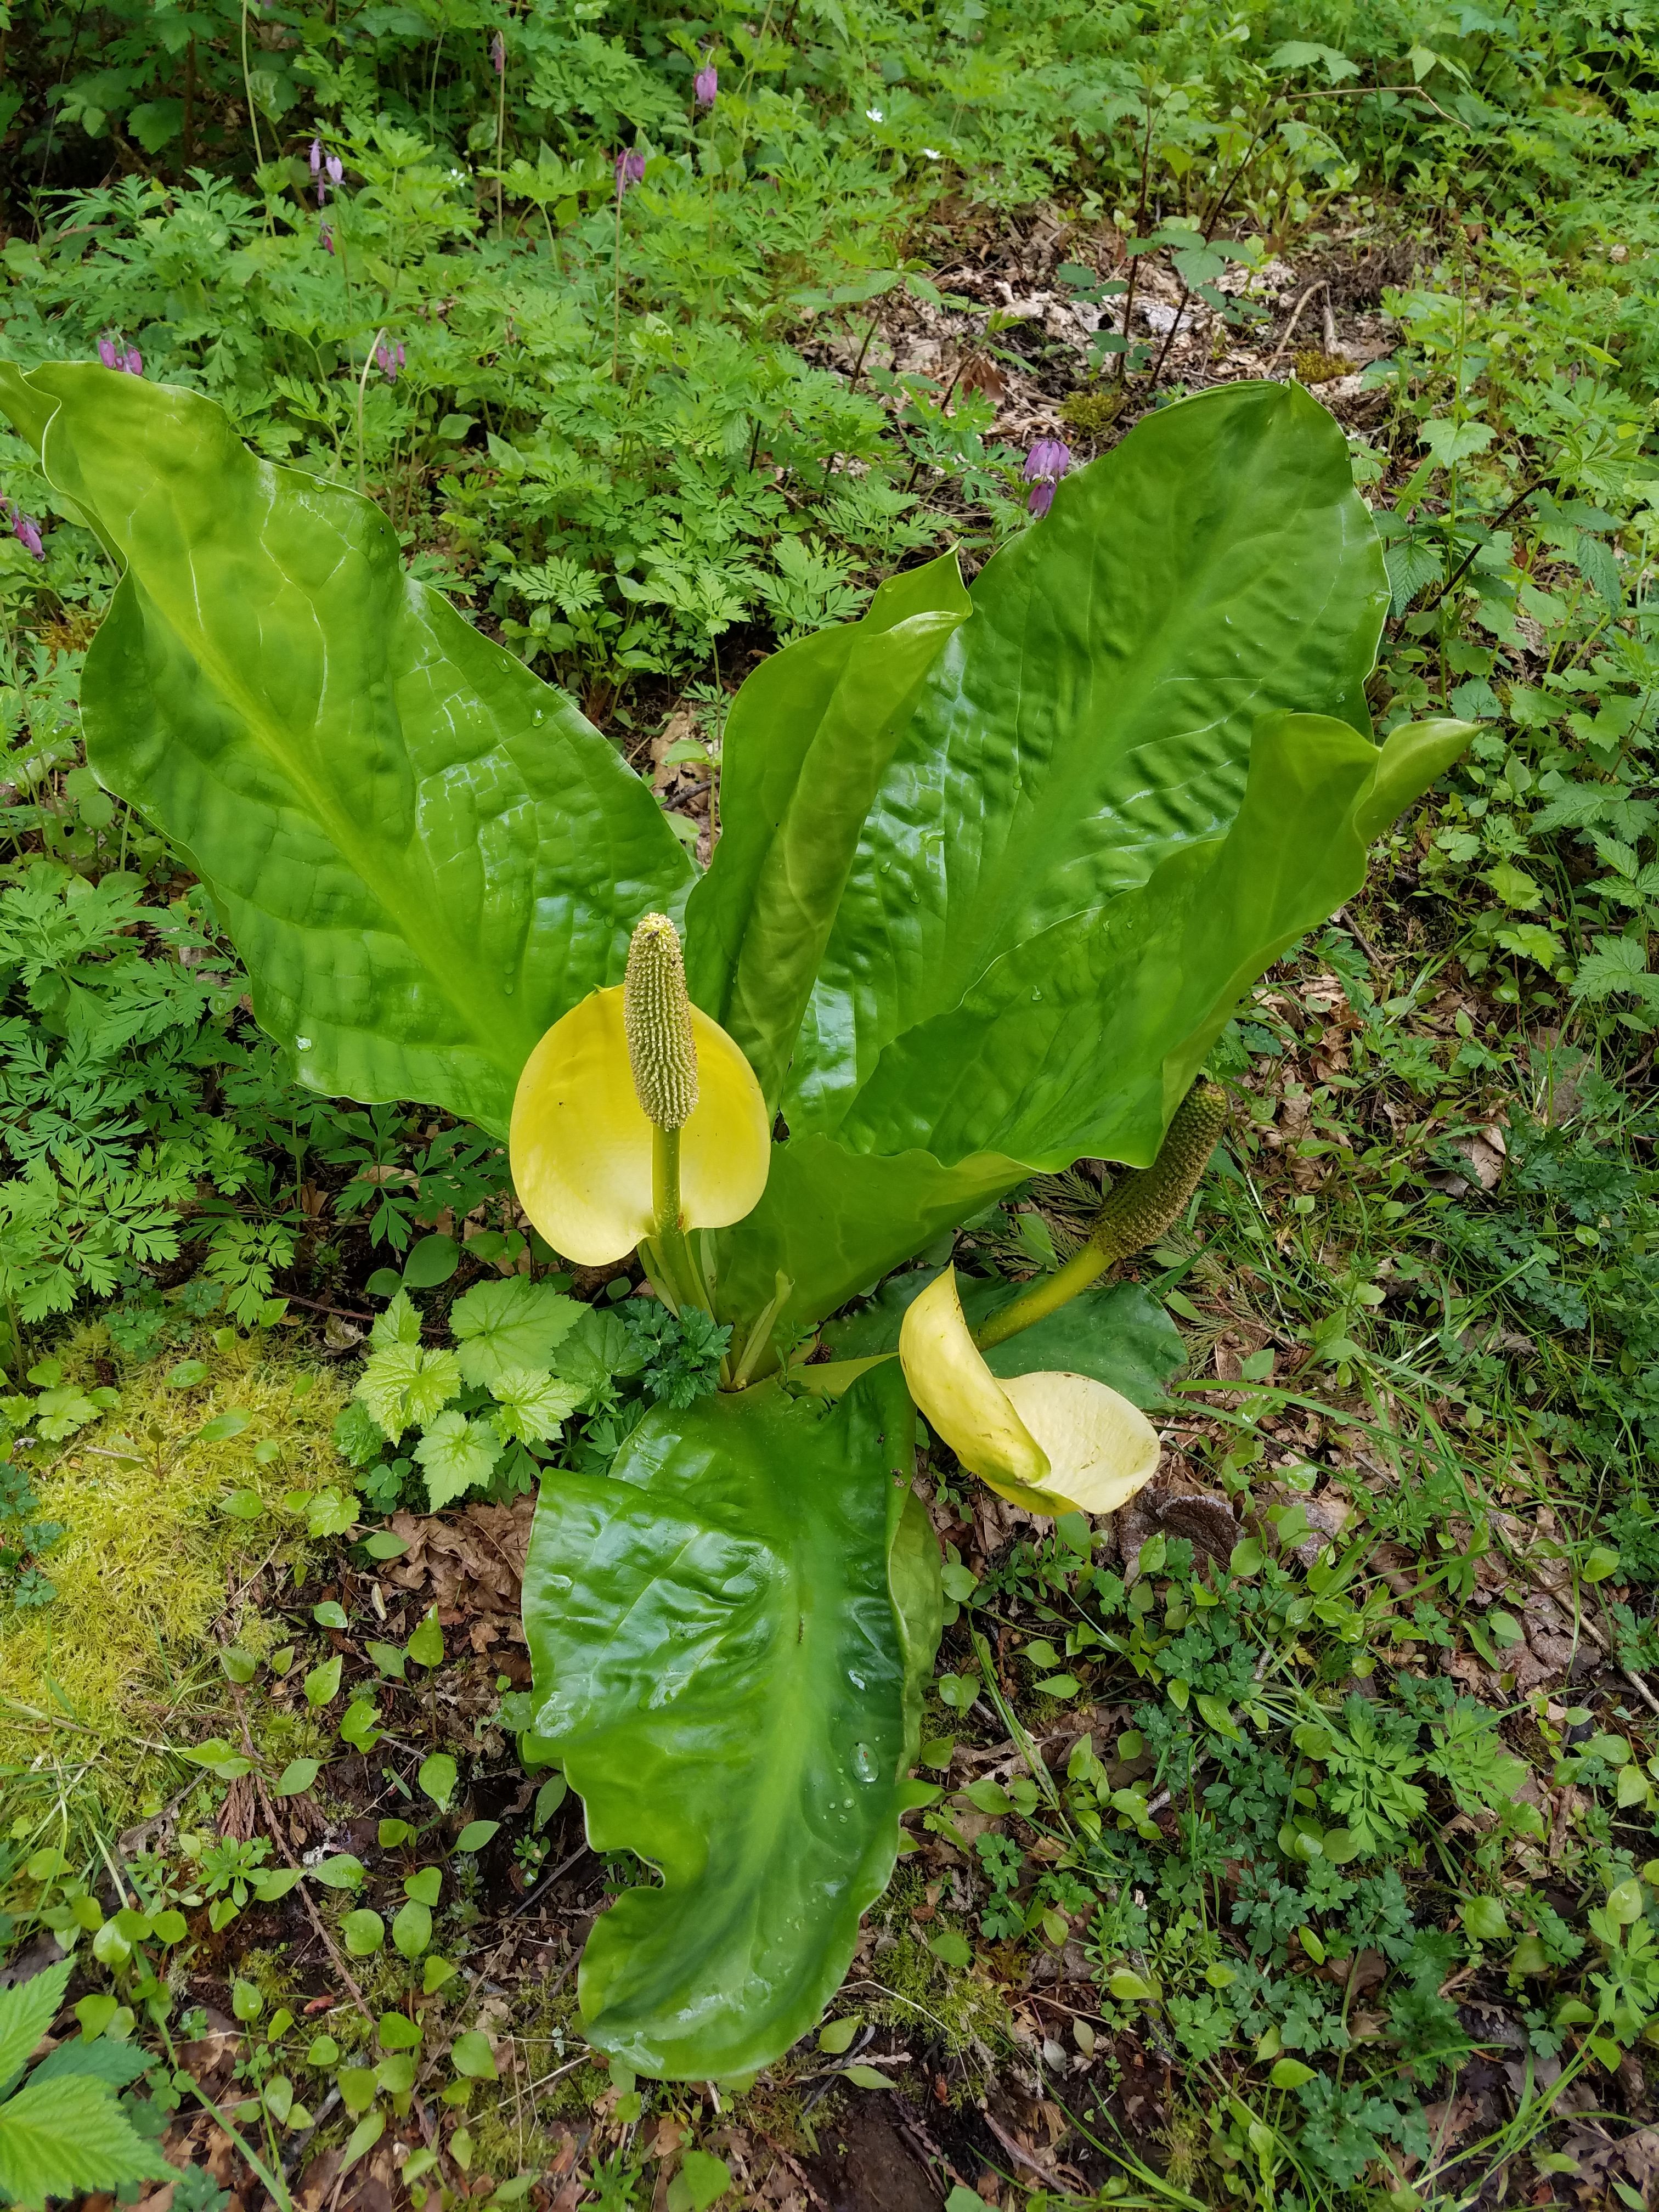 Skunk cabbage in the conifer forest of Butler Creek